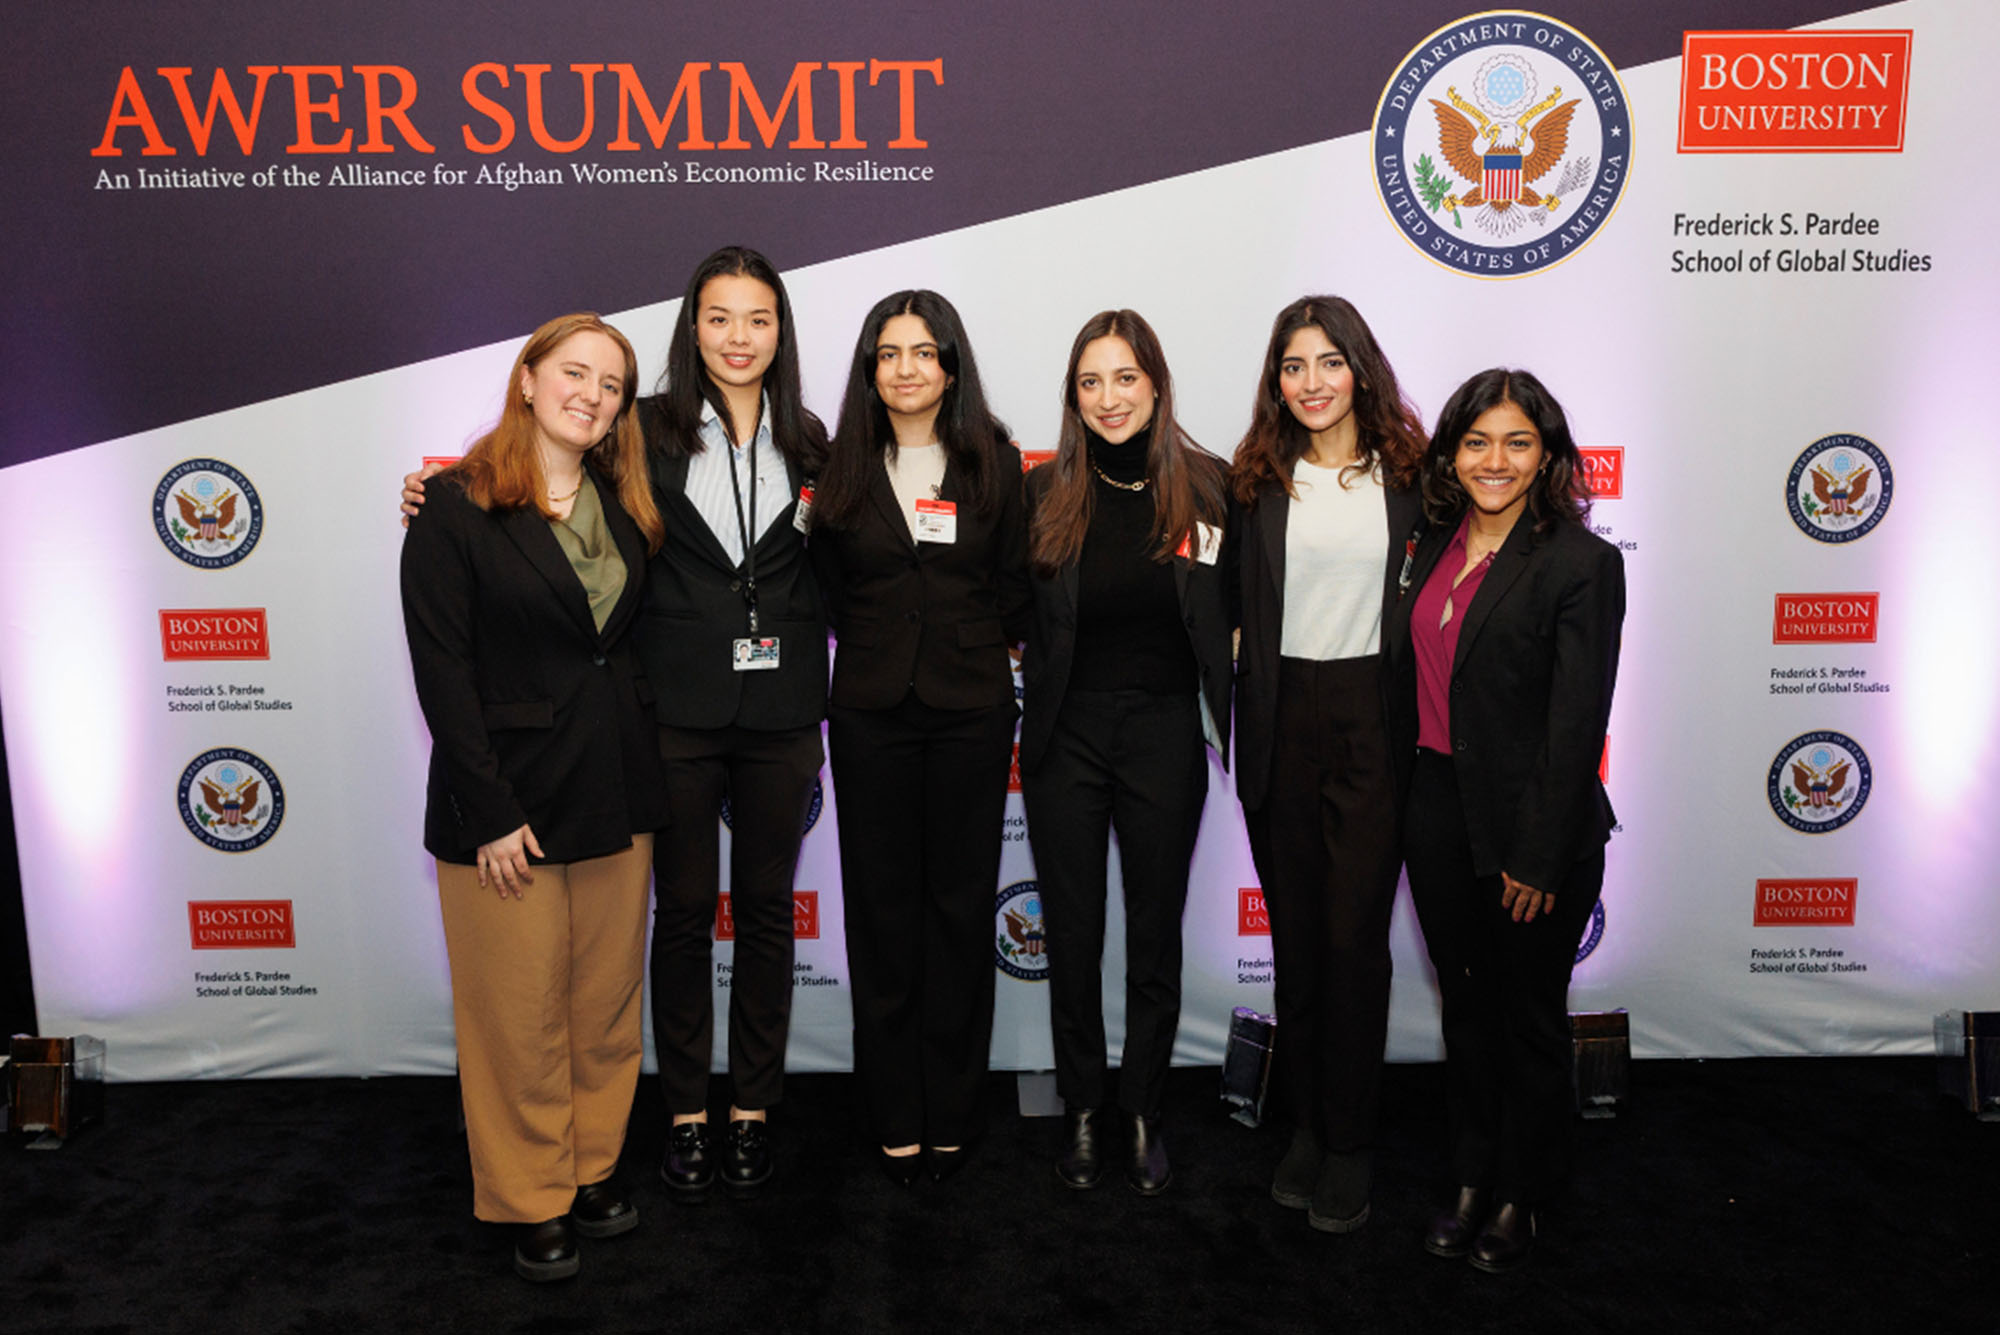 Photo: A group of college students in formal attire standing in front of a banner that reads "AWER SUMMIT"